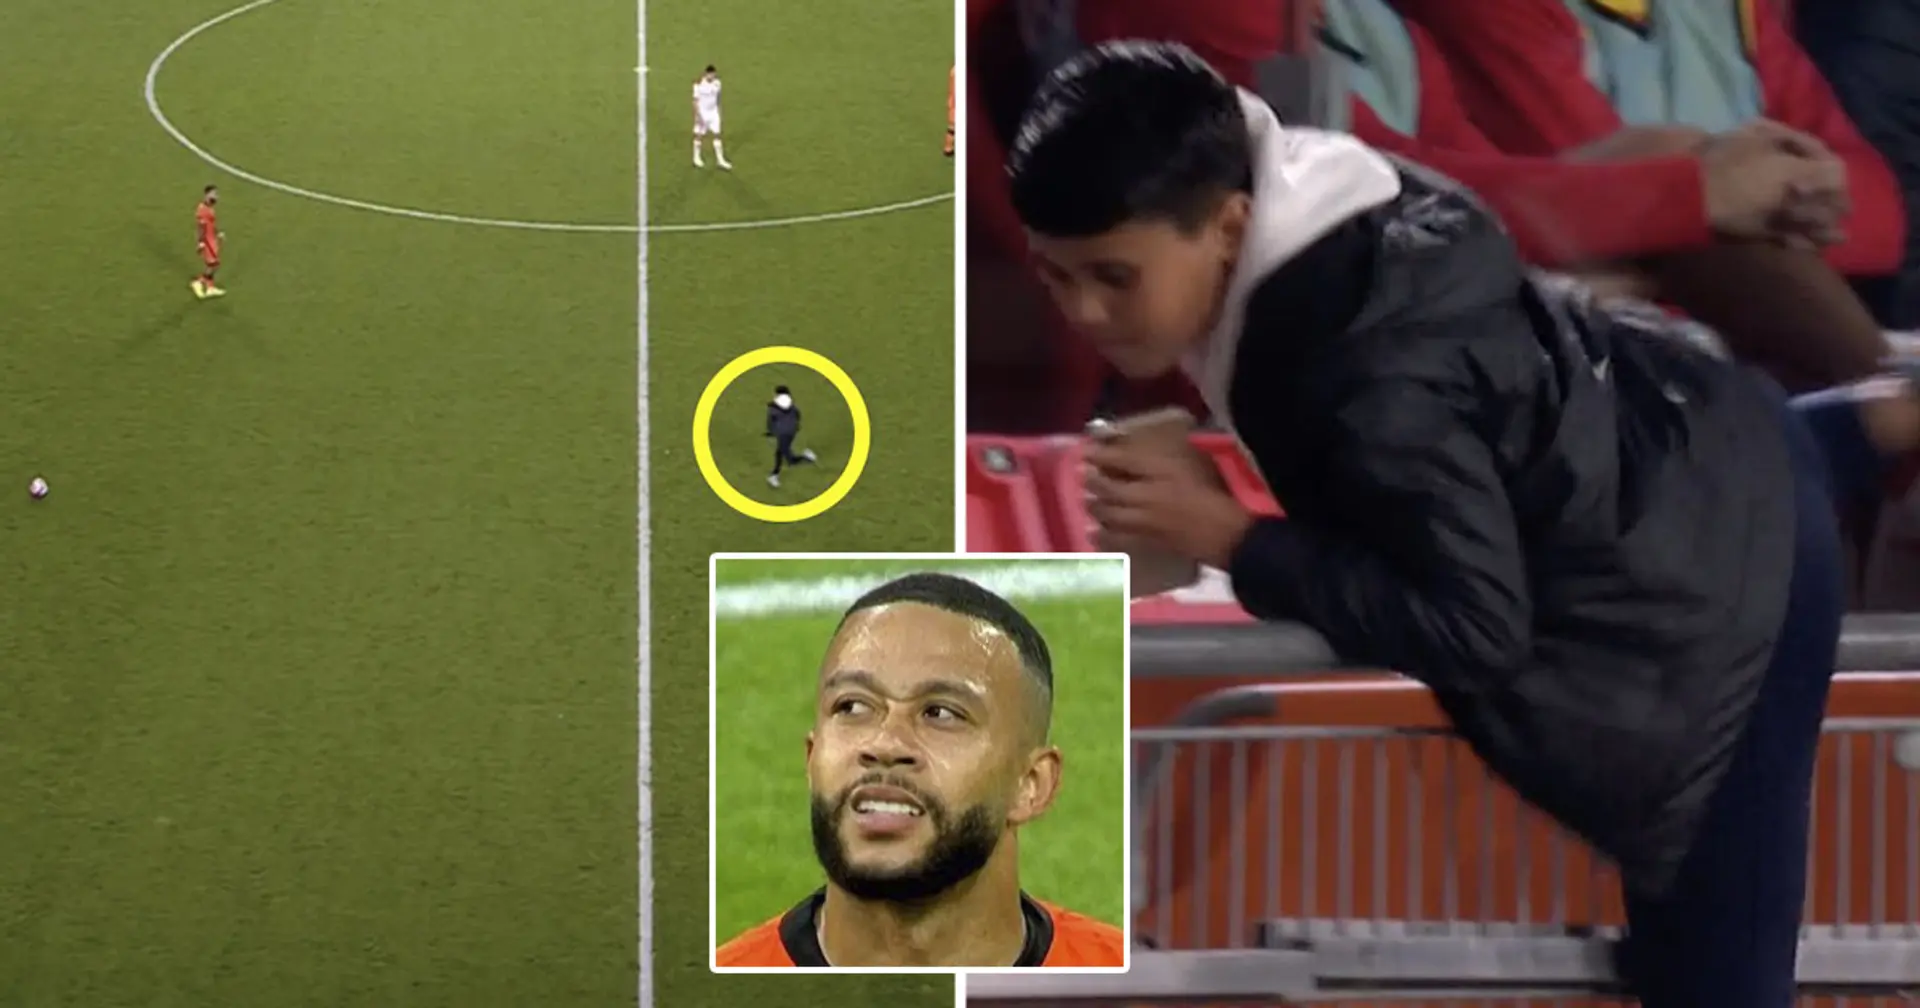 Little kid invades pitch to take selfie with Depay, Memphis' reaction spotted